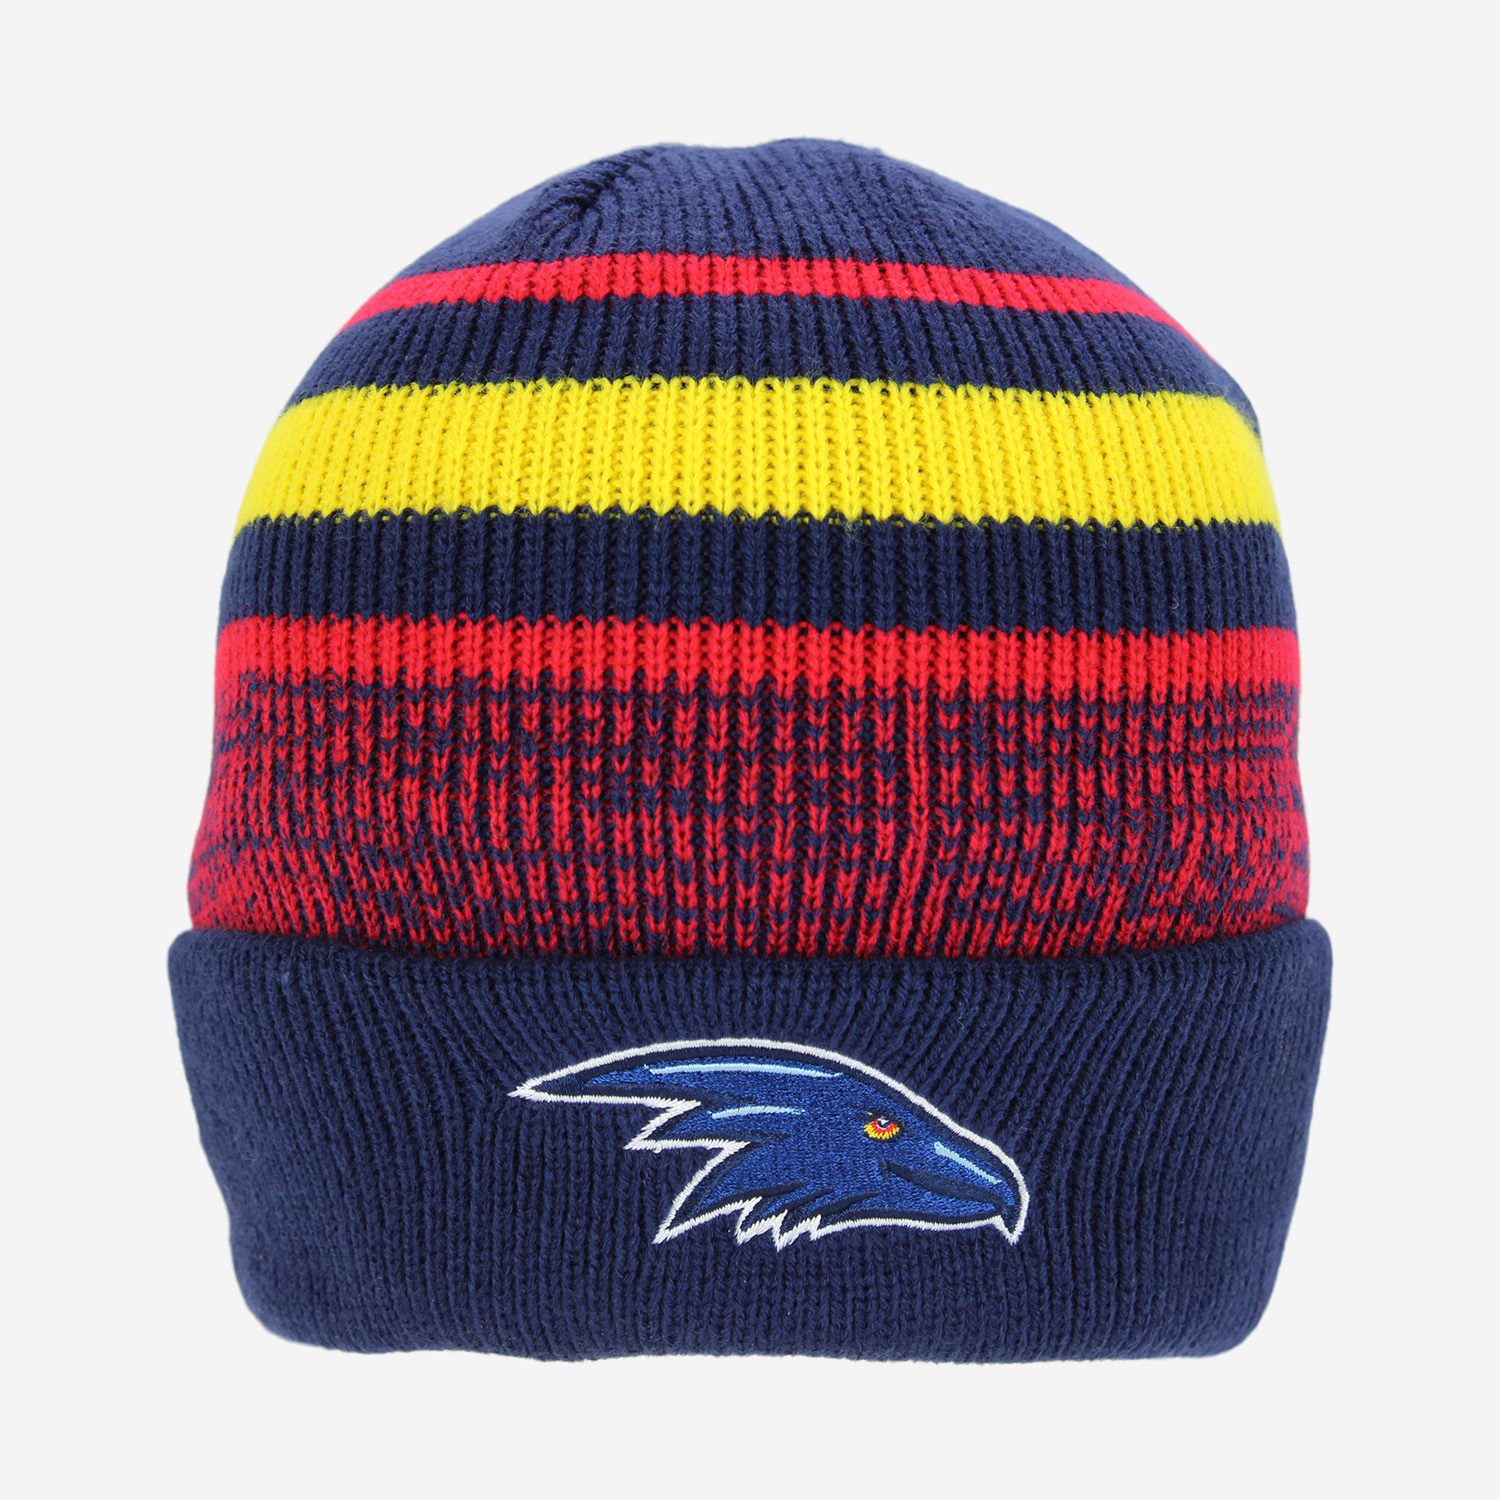 Crows Cluster Beanie